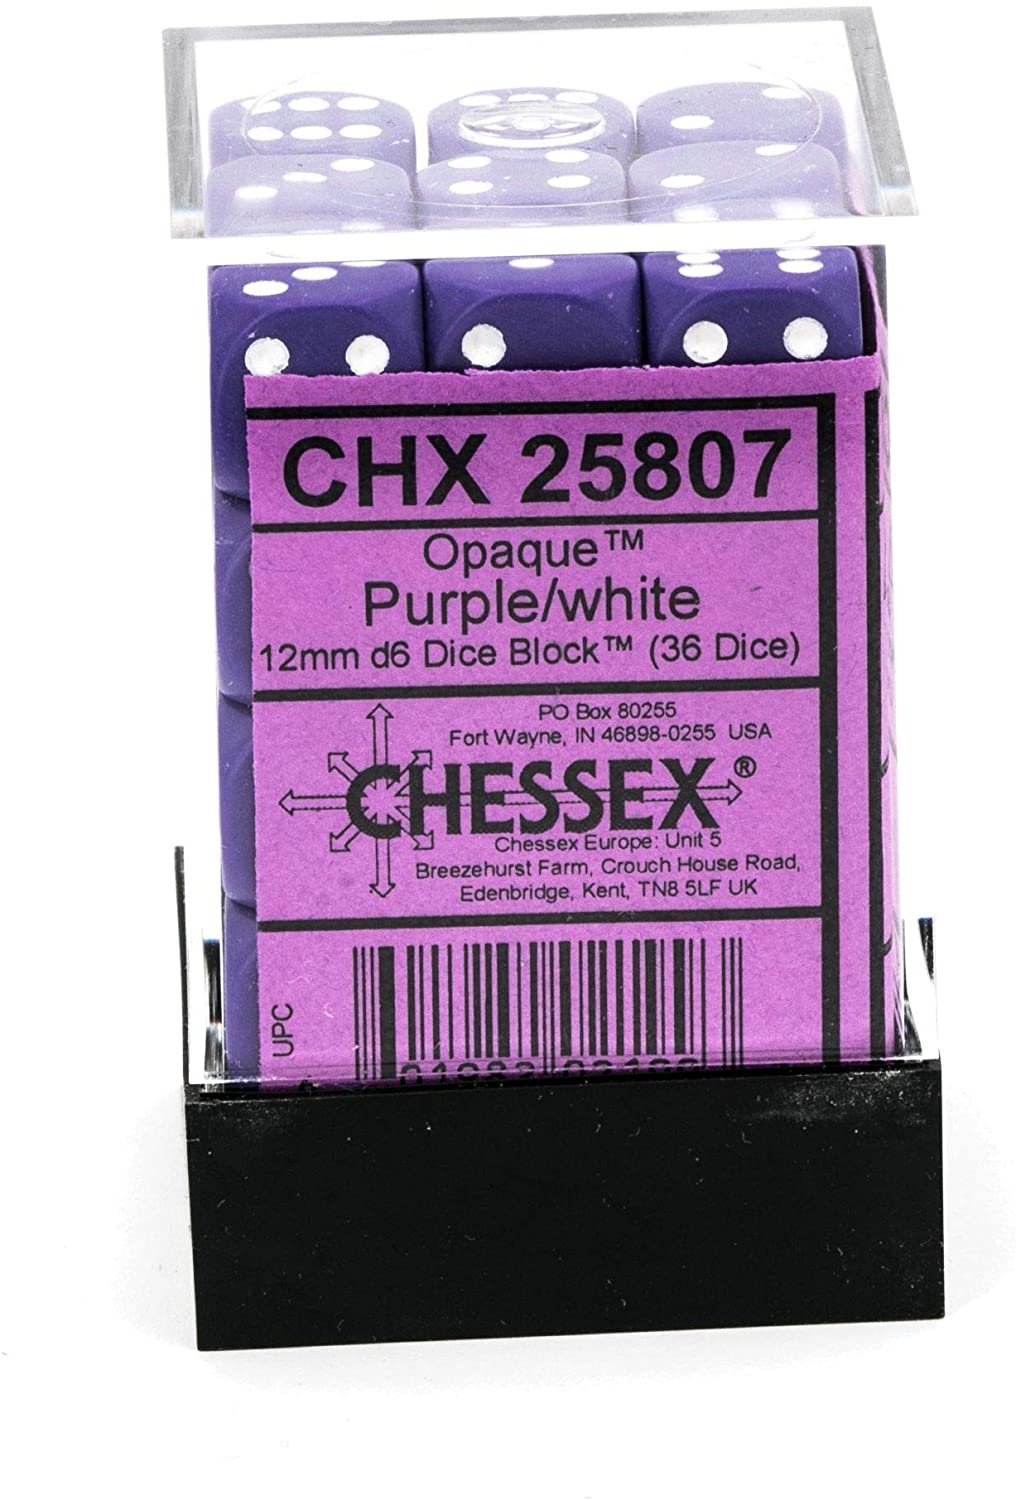 Chessex Dice: D6 Block 12mm - Opaque - Purple with White (CHX 25807) - Gamescape